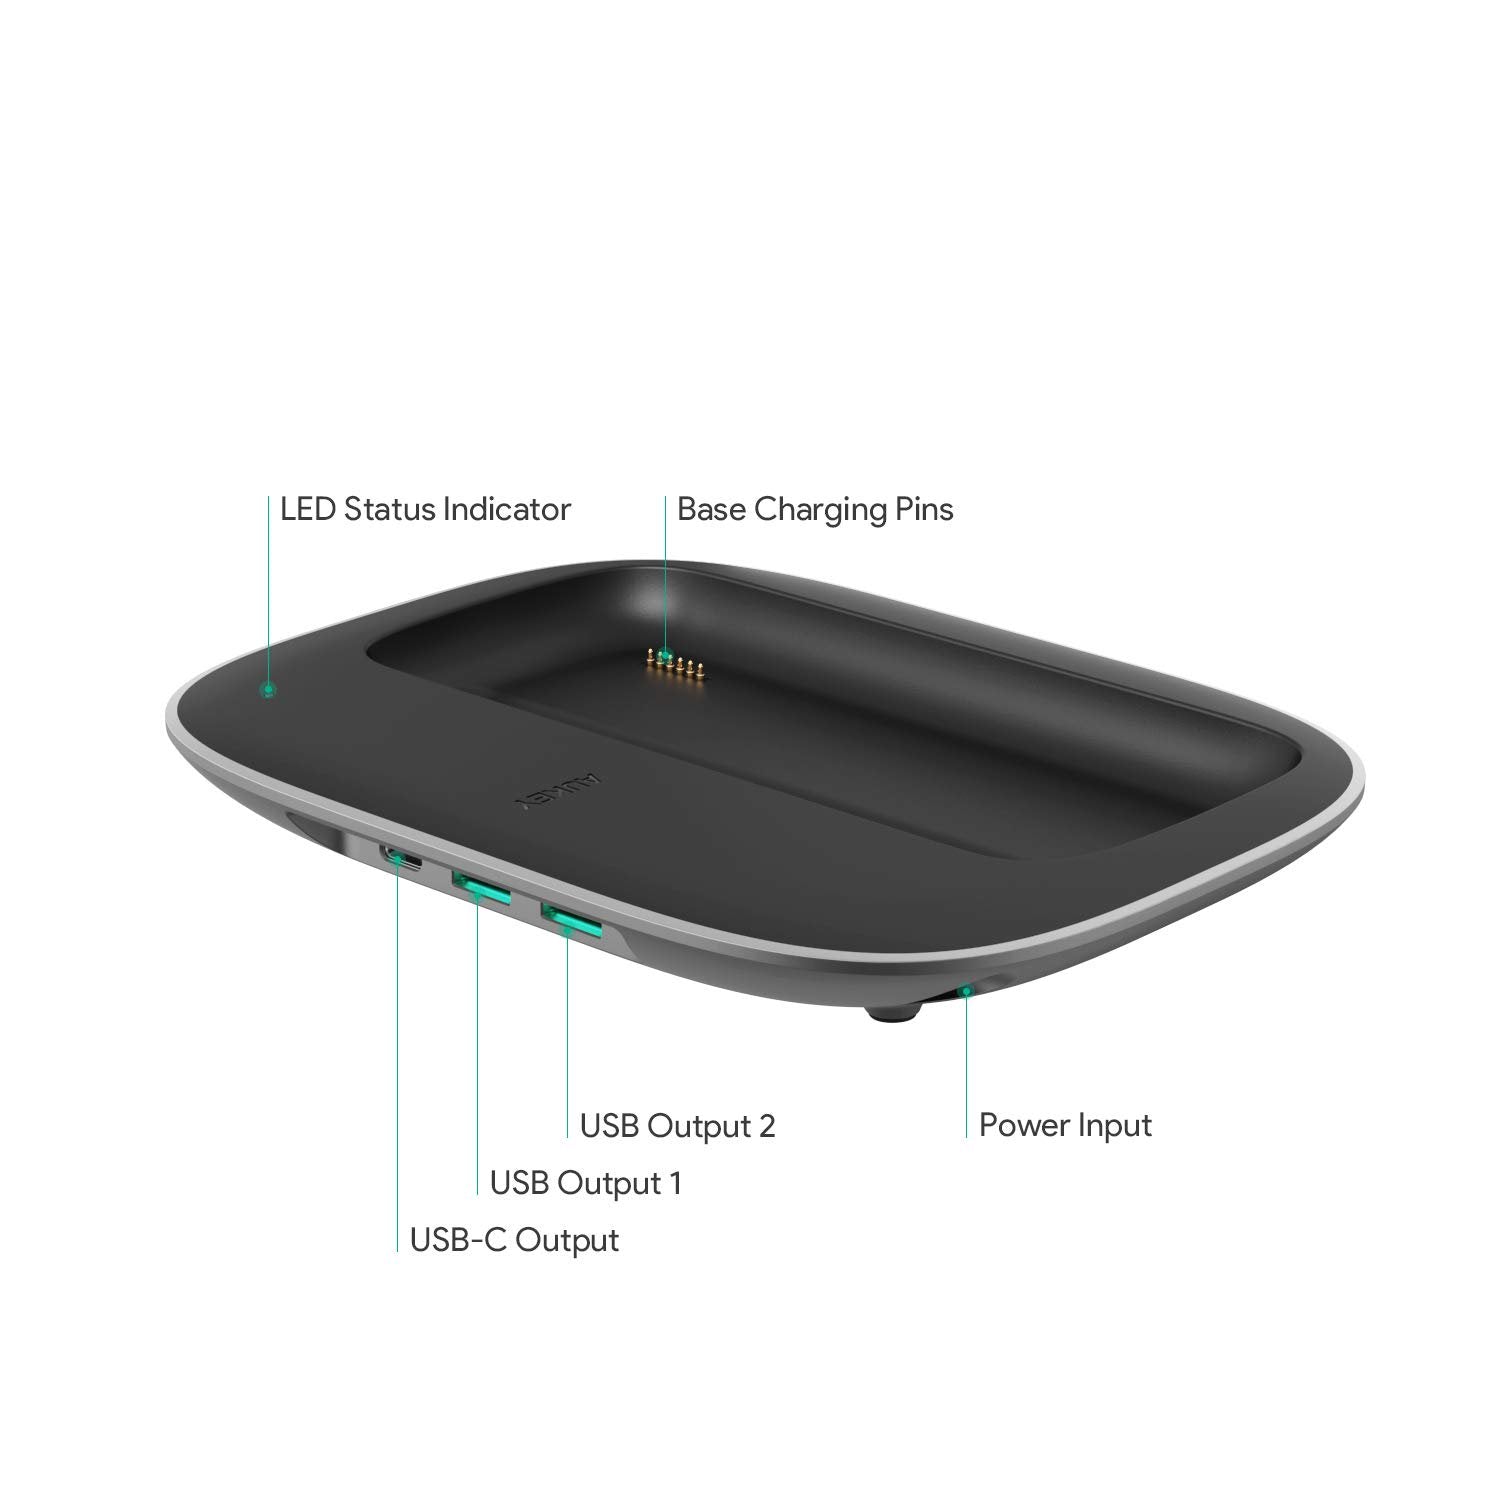 10,000mAh Power Bank with Built-In Wireless Charging Pad + Power Delivery Charging Base